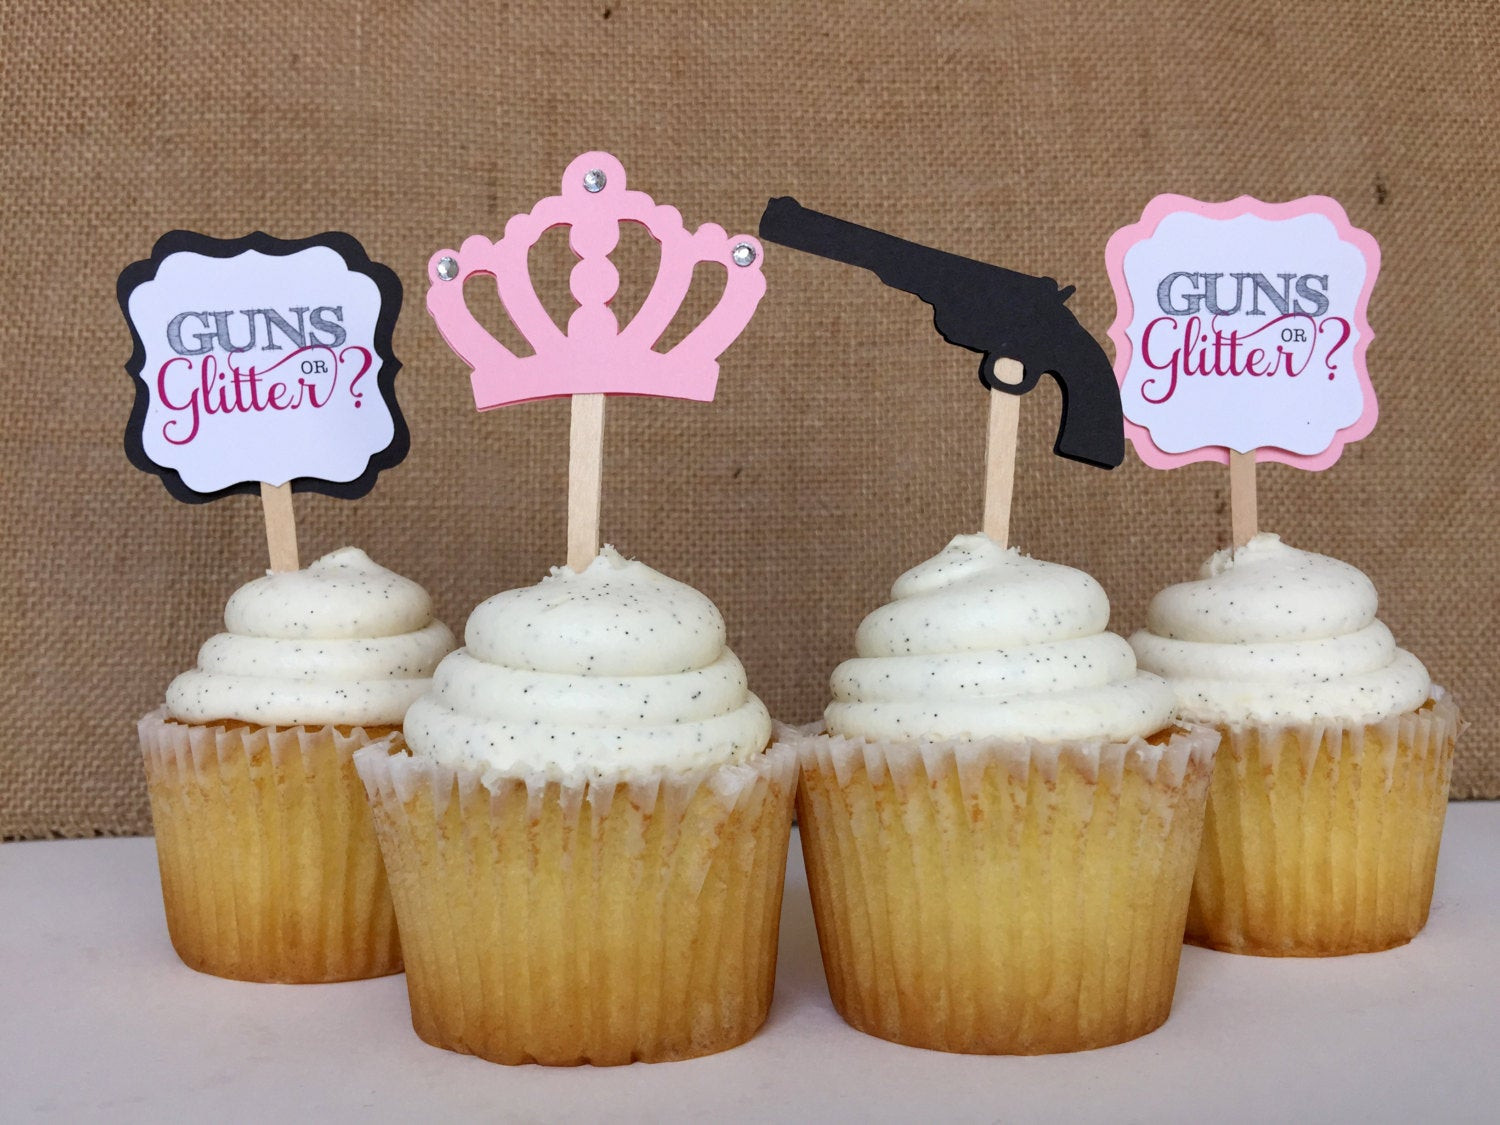 Guns And Glitter Gender Reveal Party Ideas
 12 GUNS OR GLITTER Gender reveal baby shower Cupcake Toppers